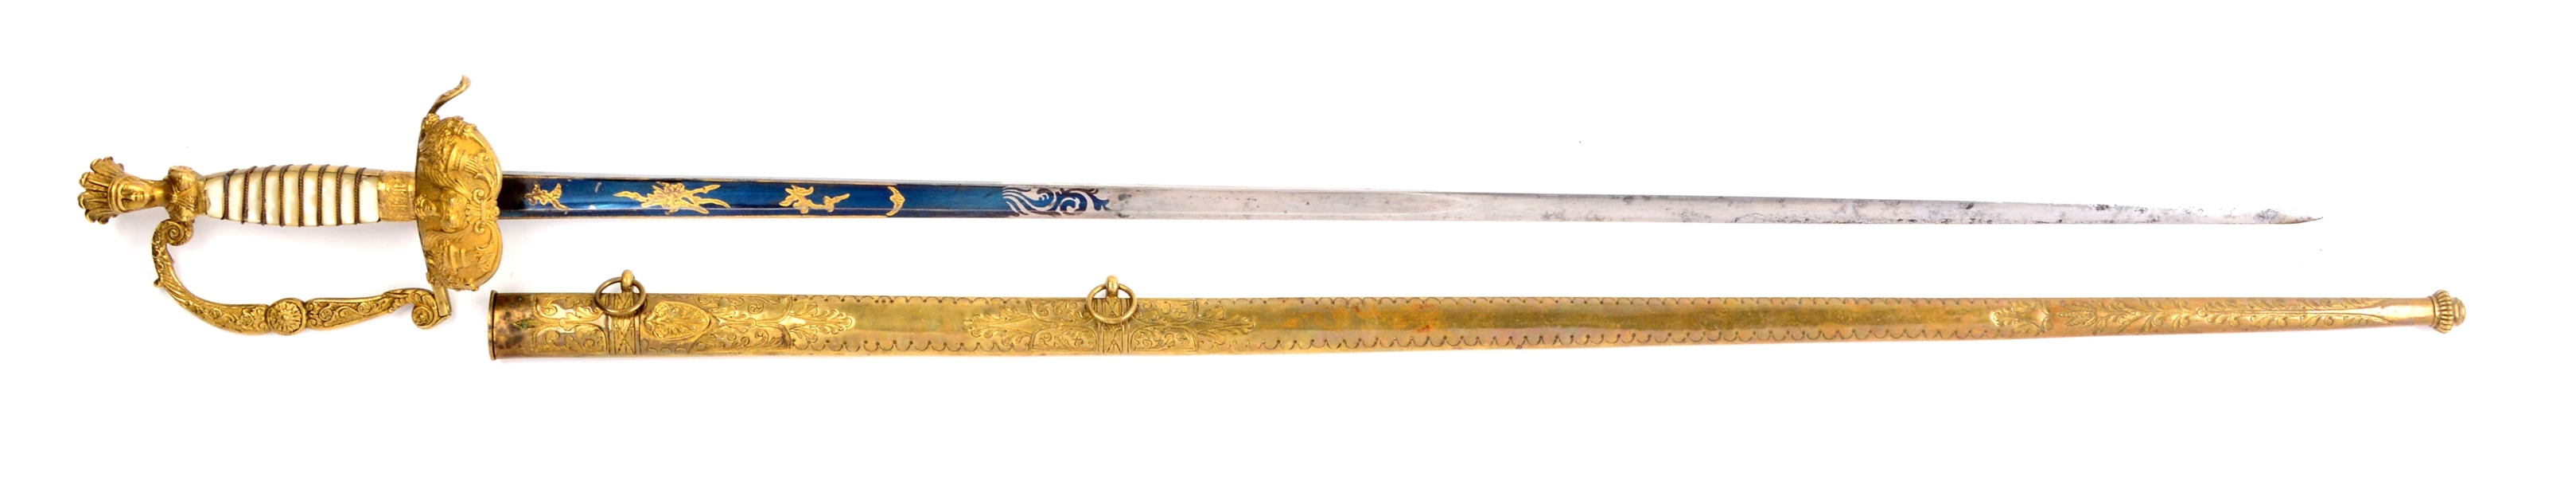 MILITIA OFFICERS INDIAN PRINCESS POMMEL SWORD WITH SCABBARD.